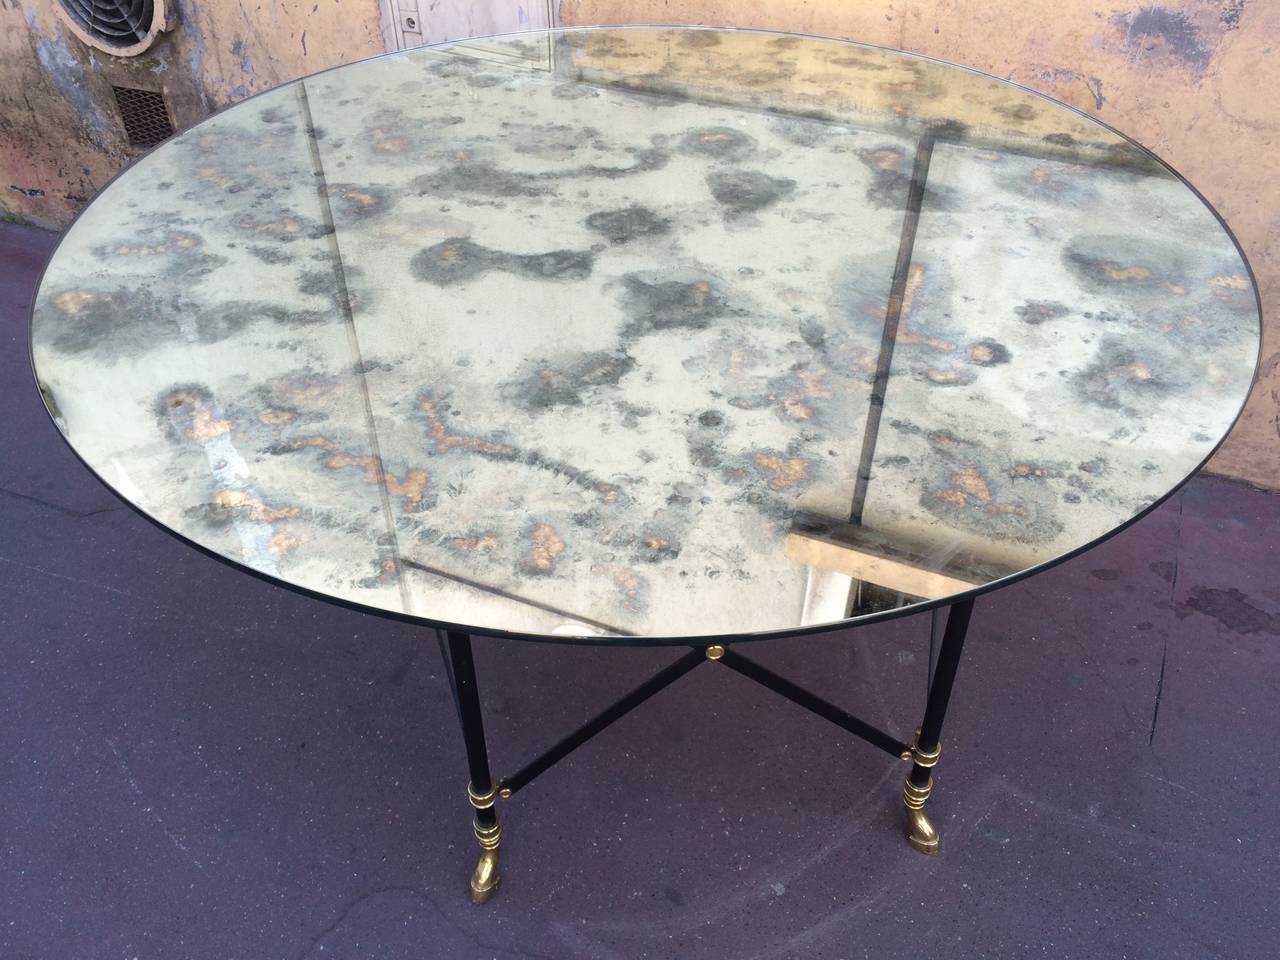 Maison Jansen Round Dining Table with a Thick Eglomized Mirror Top In Excellent Condition For Sale In Paris, ile de france